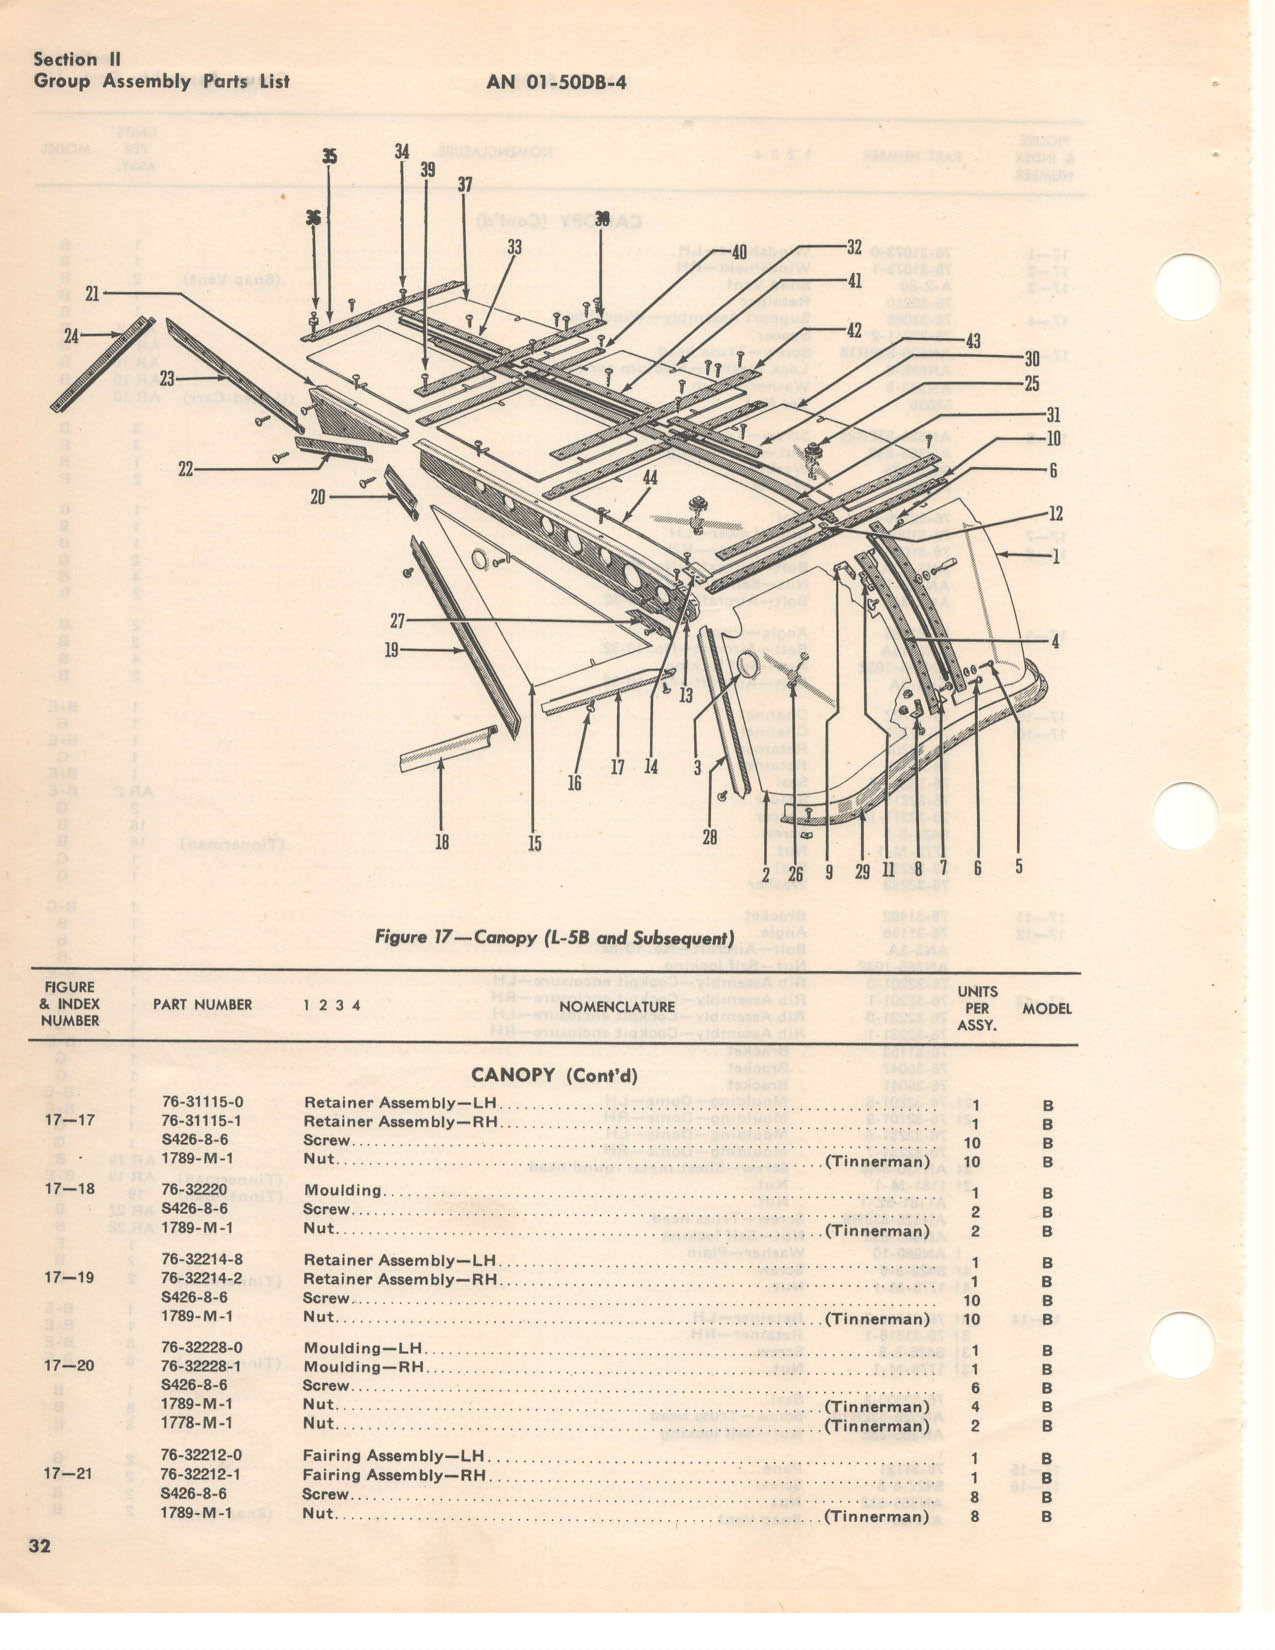 Sample page 36 from AirCorps Library document: Parts Catalog - L-5, OY-1, OY-2